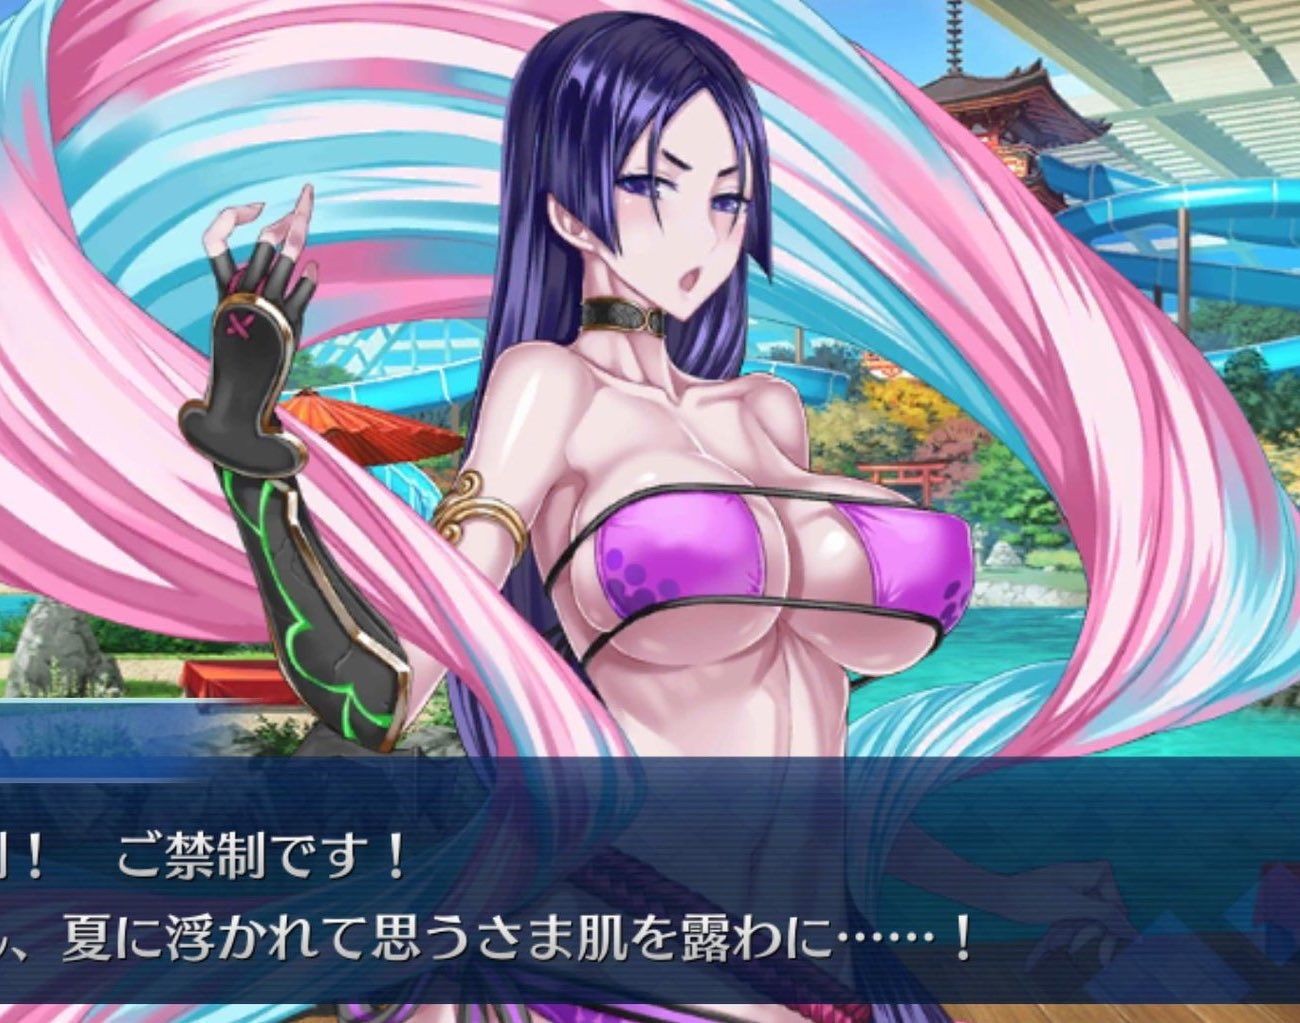 Hard Cock 【Sad News】 FGO, The Character Of The Swimsuit Event Is Too Uncomfortable And The No Age Limit Is Slapped As Abnormal Time